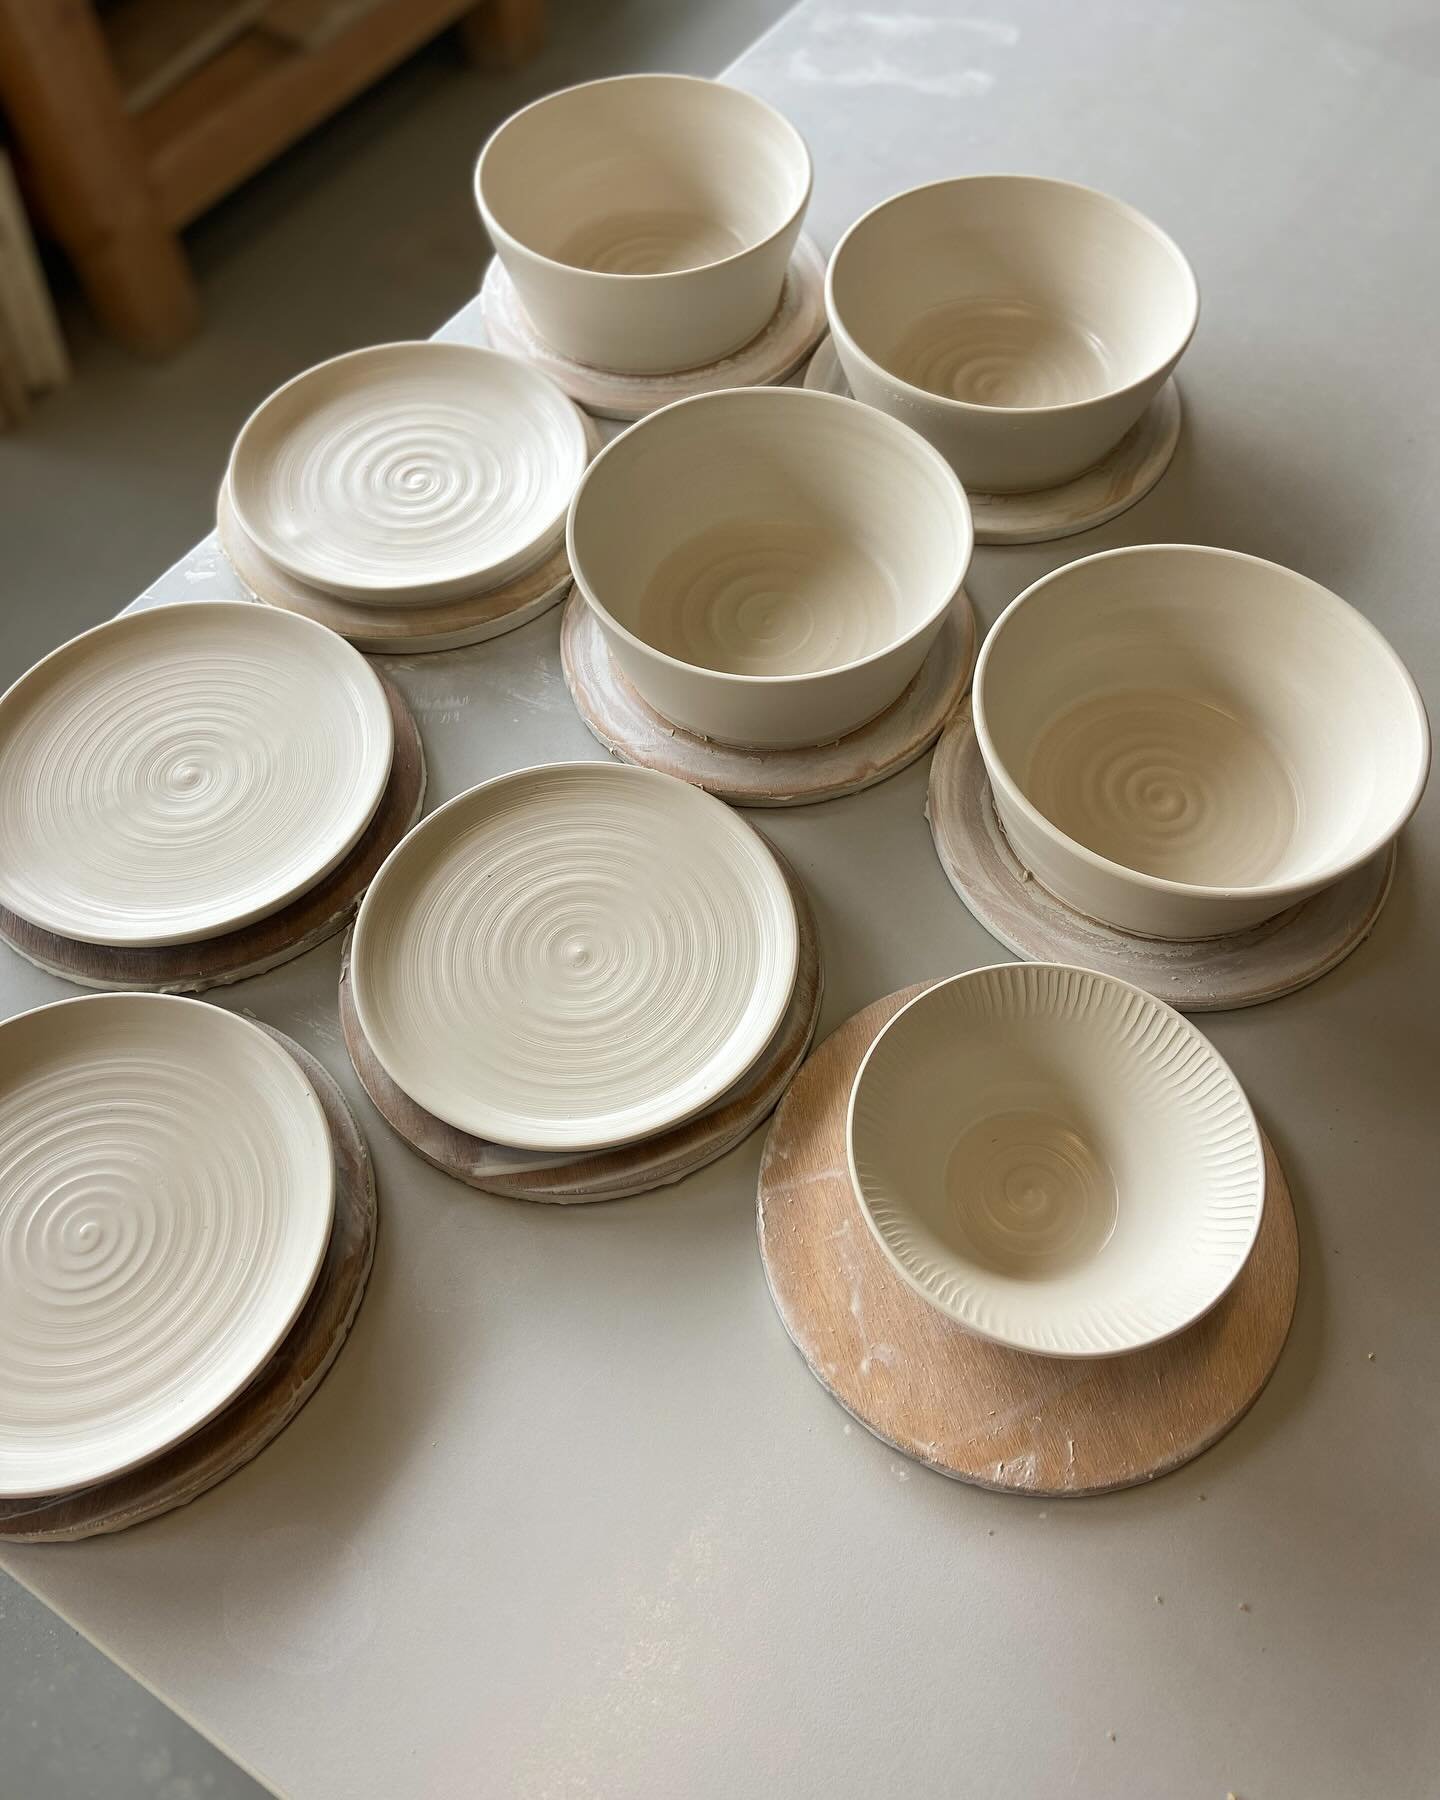 Wheel throwing some porcelain as shape tests for a possible order. Porcelain is more expensive to work with, so often orders are made in stoneware. However, due to the vitrification of the porcelain clay body in high fire, the vessels become more dur